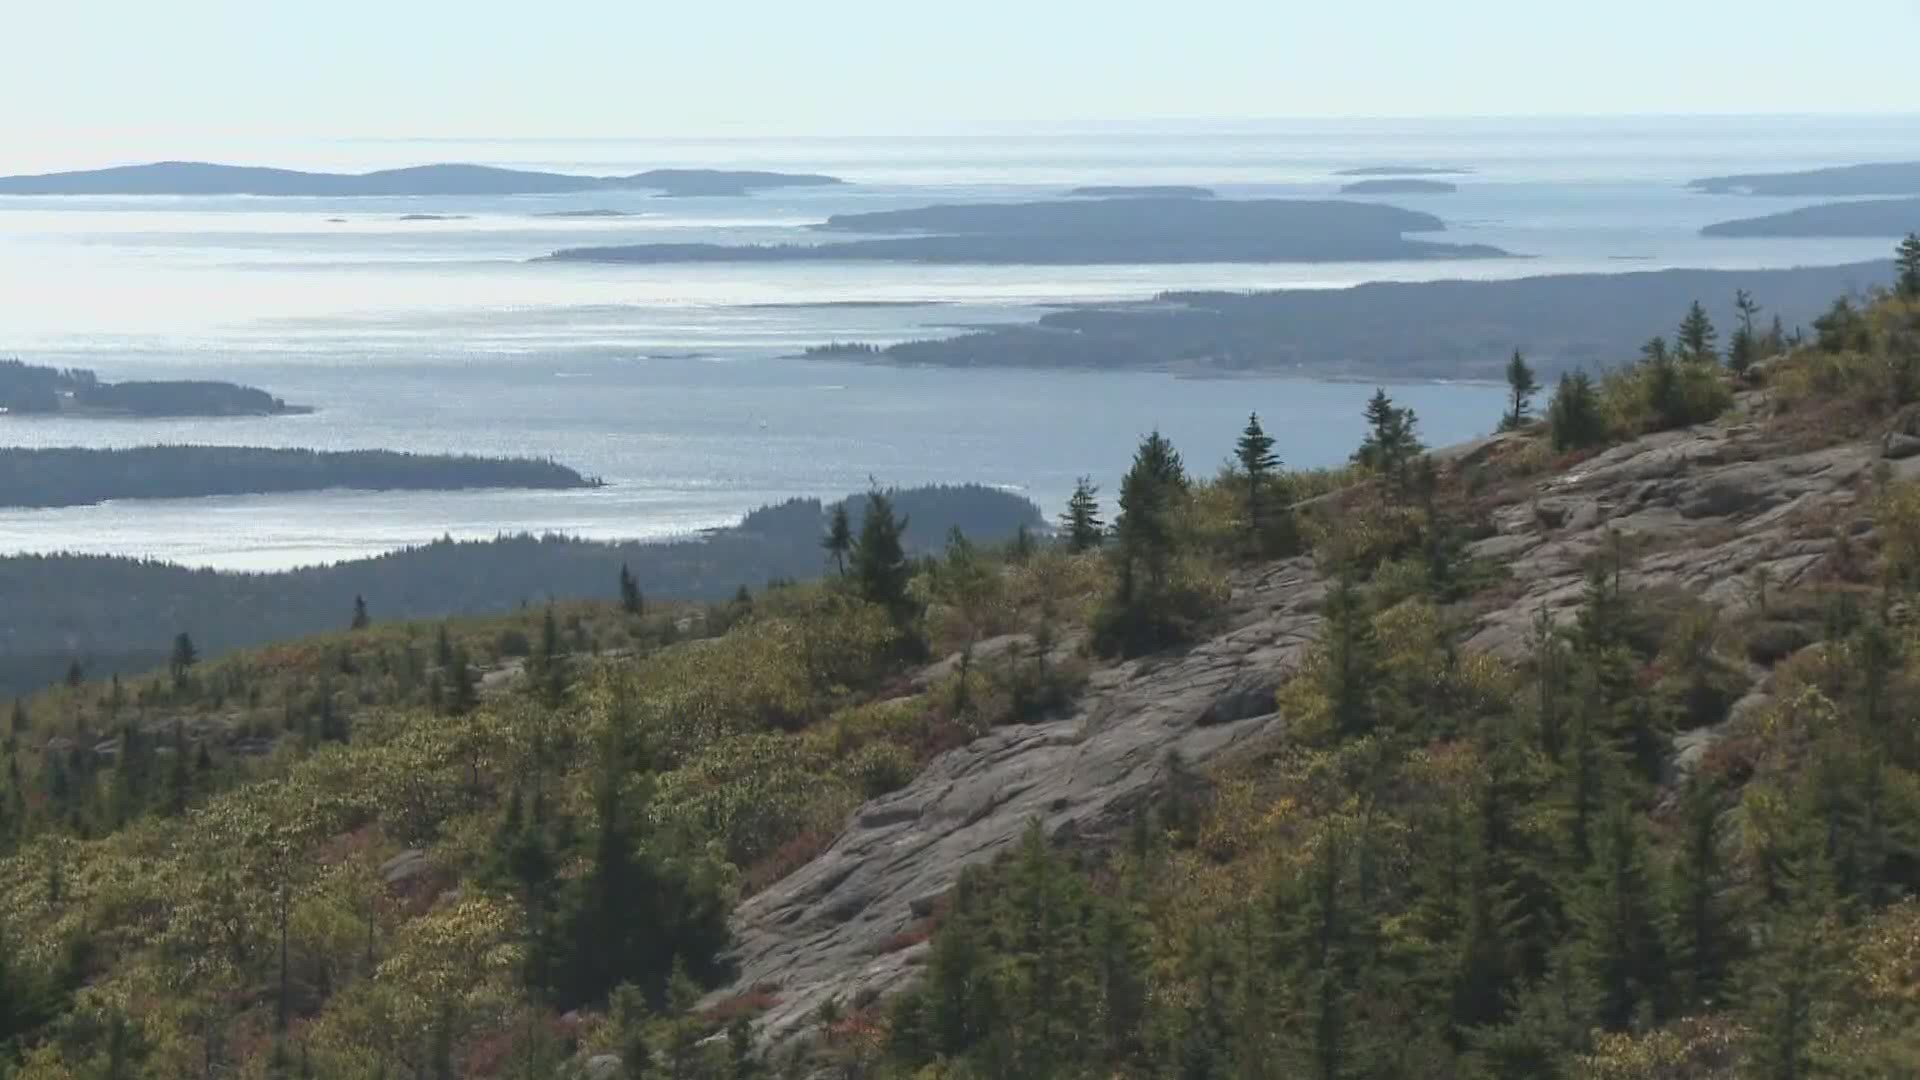 This would normally be a busy time at Acadia National Park, instead the park is working to figure out when it can open to the public.